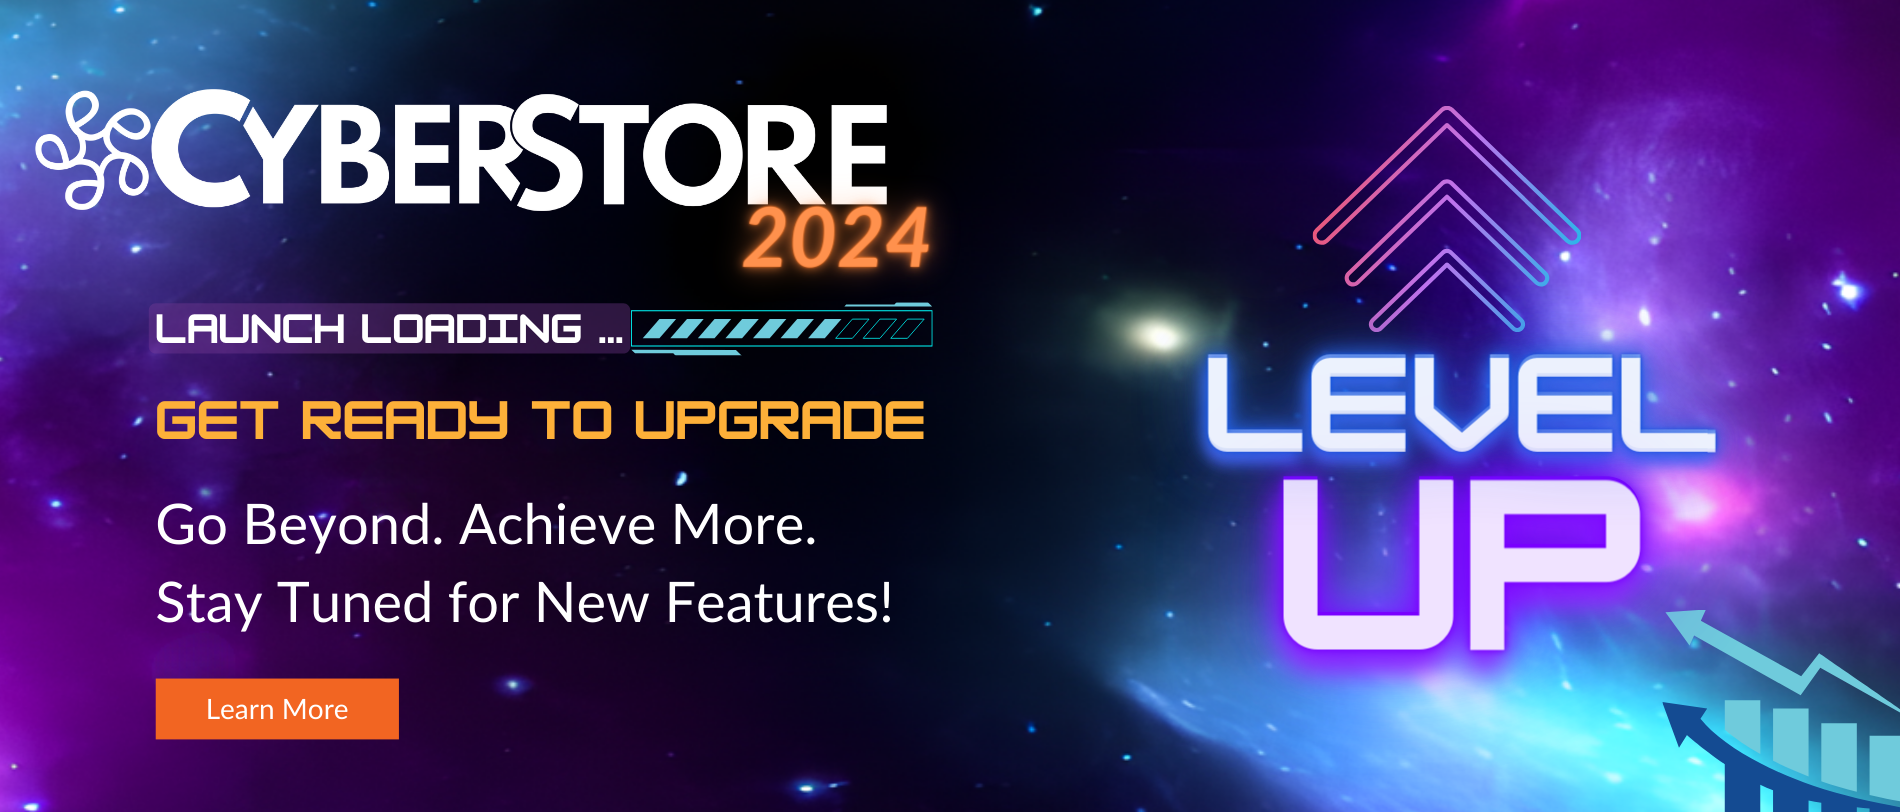 CyberStore 2024 Coming Soon. Get ready to Level Up! Go Beyond. Achieve More.